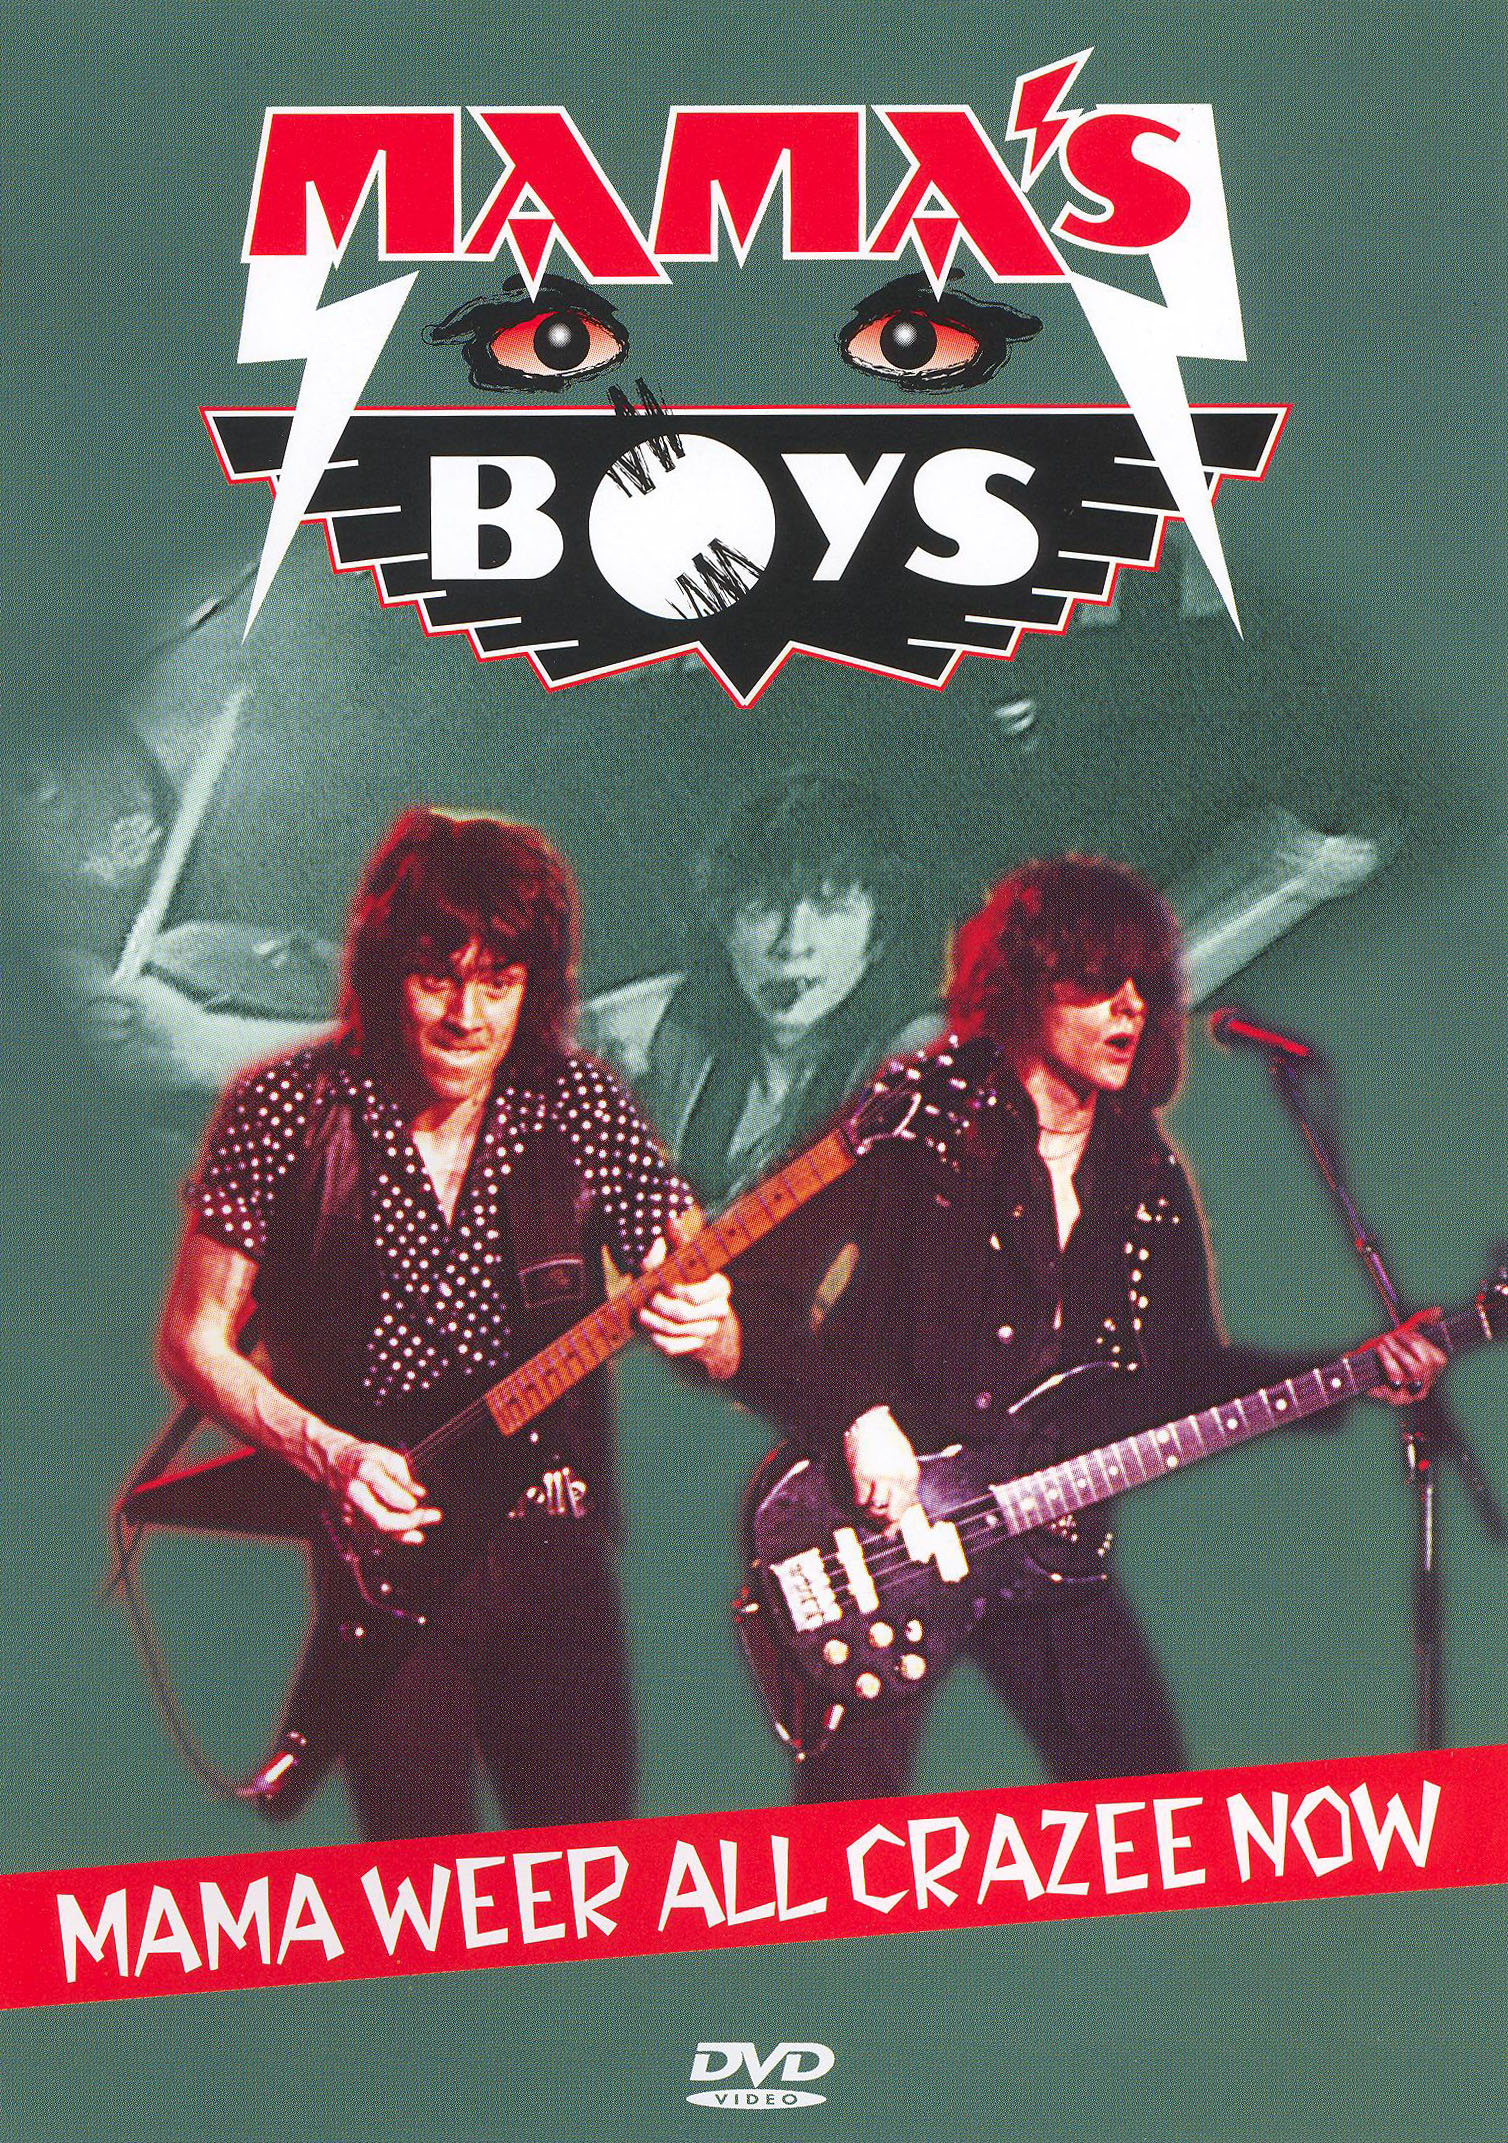 Best Buy: Mama's Boys: Mama Weer All Crazee Now Live [DVD] [1985]